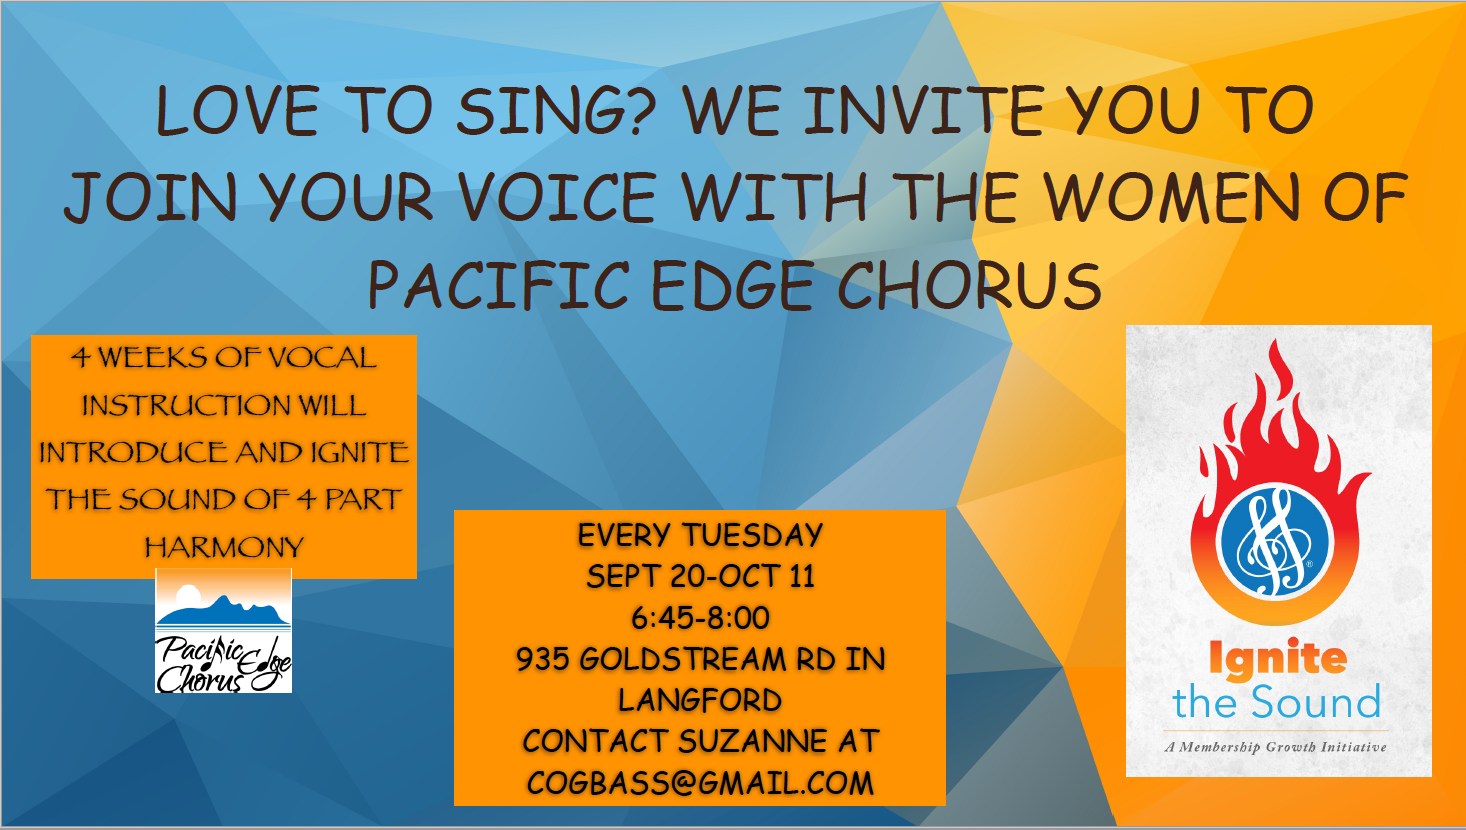 Ignite the Sound with FREE vocal instruction